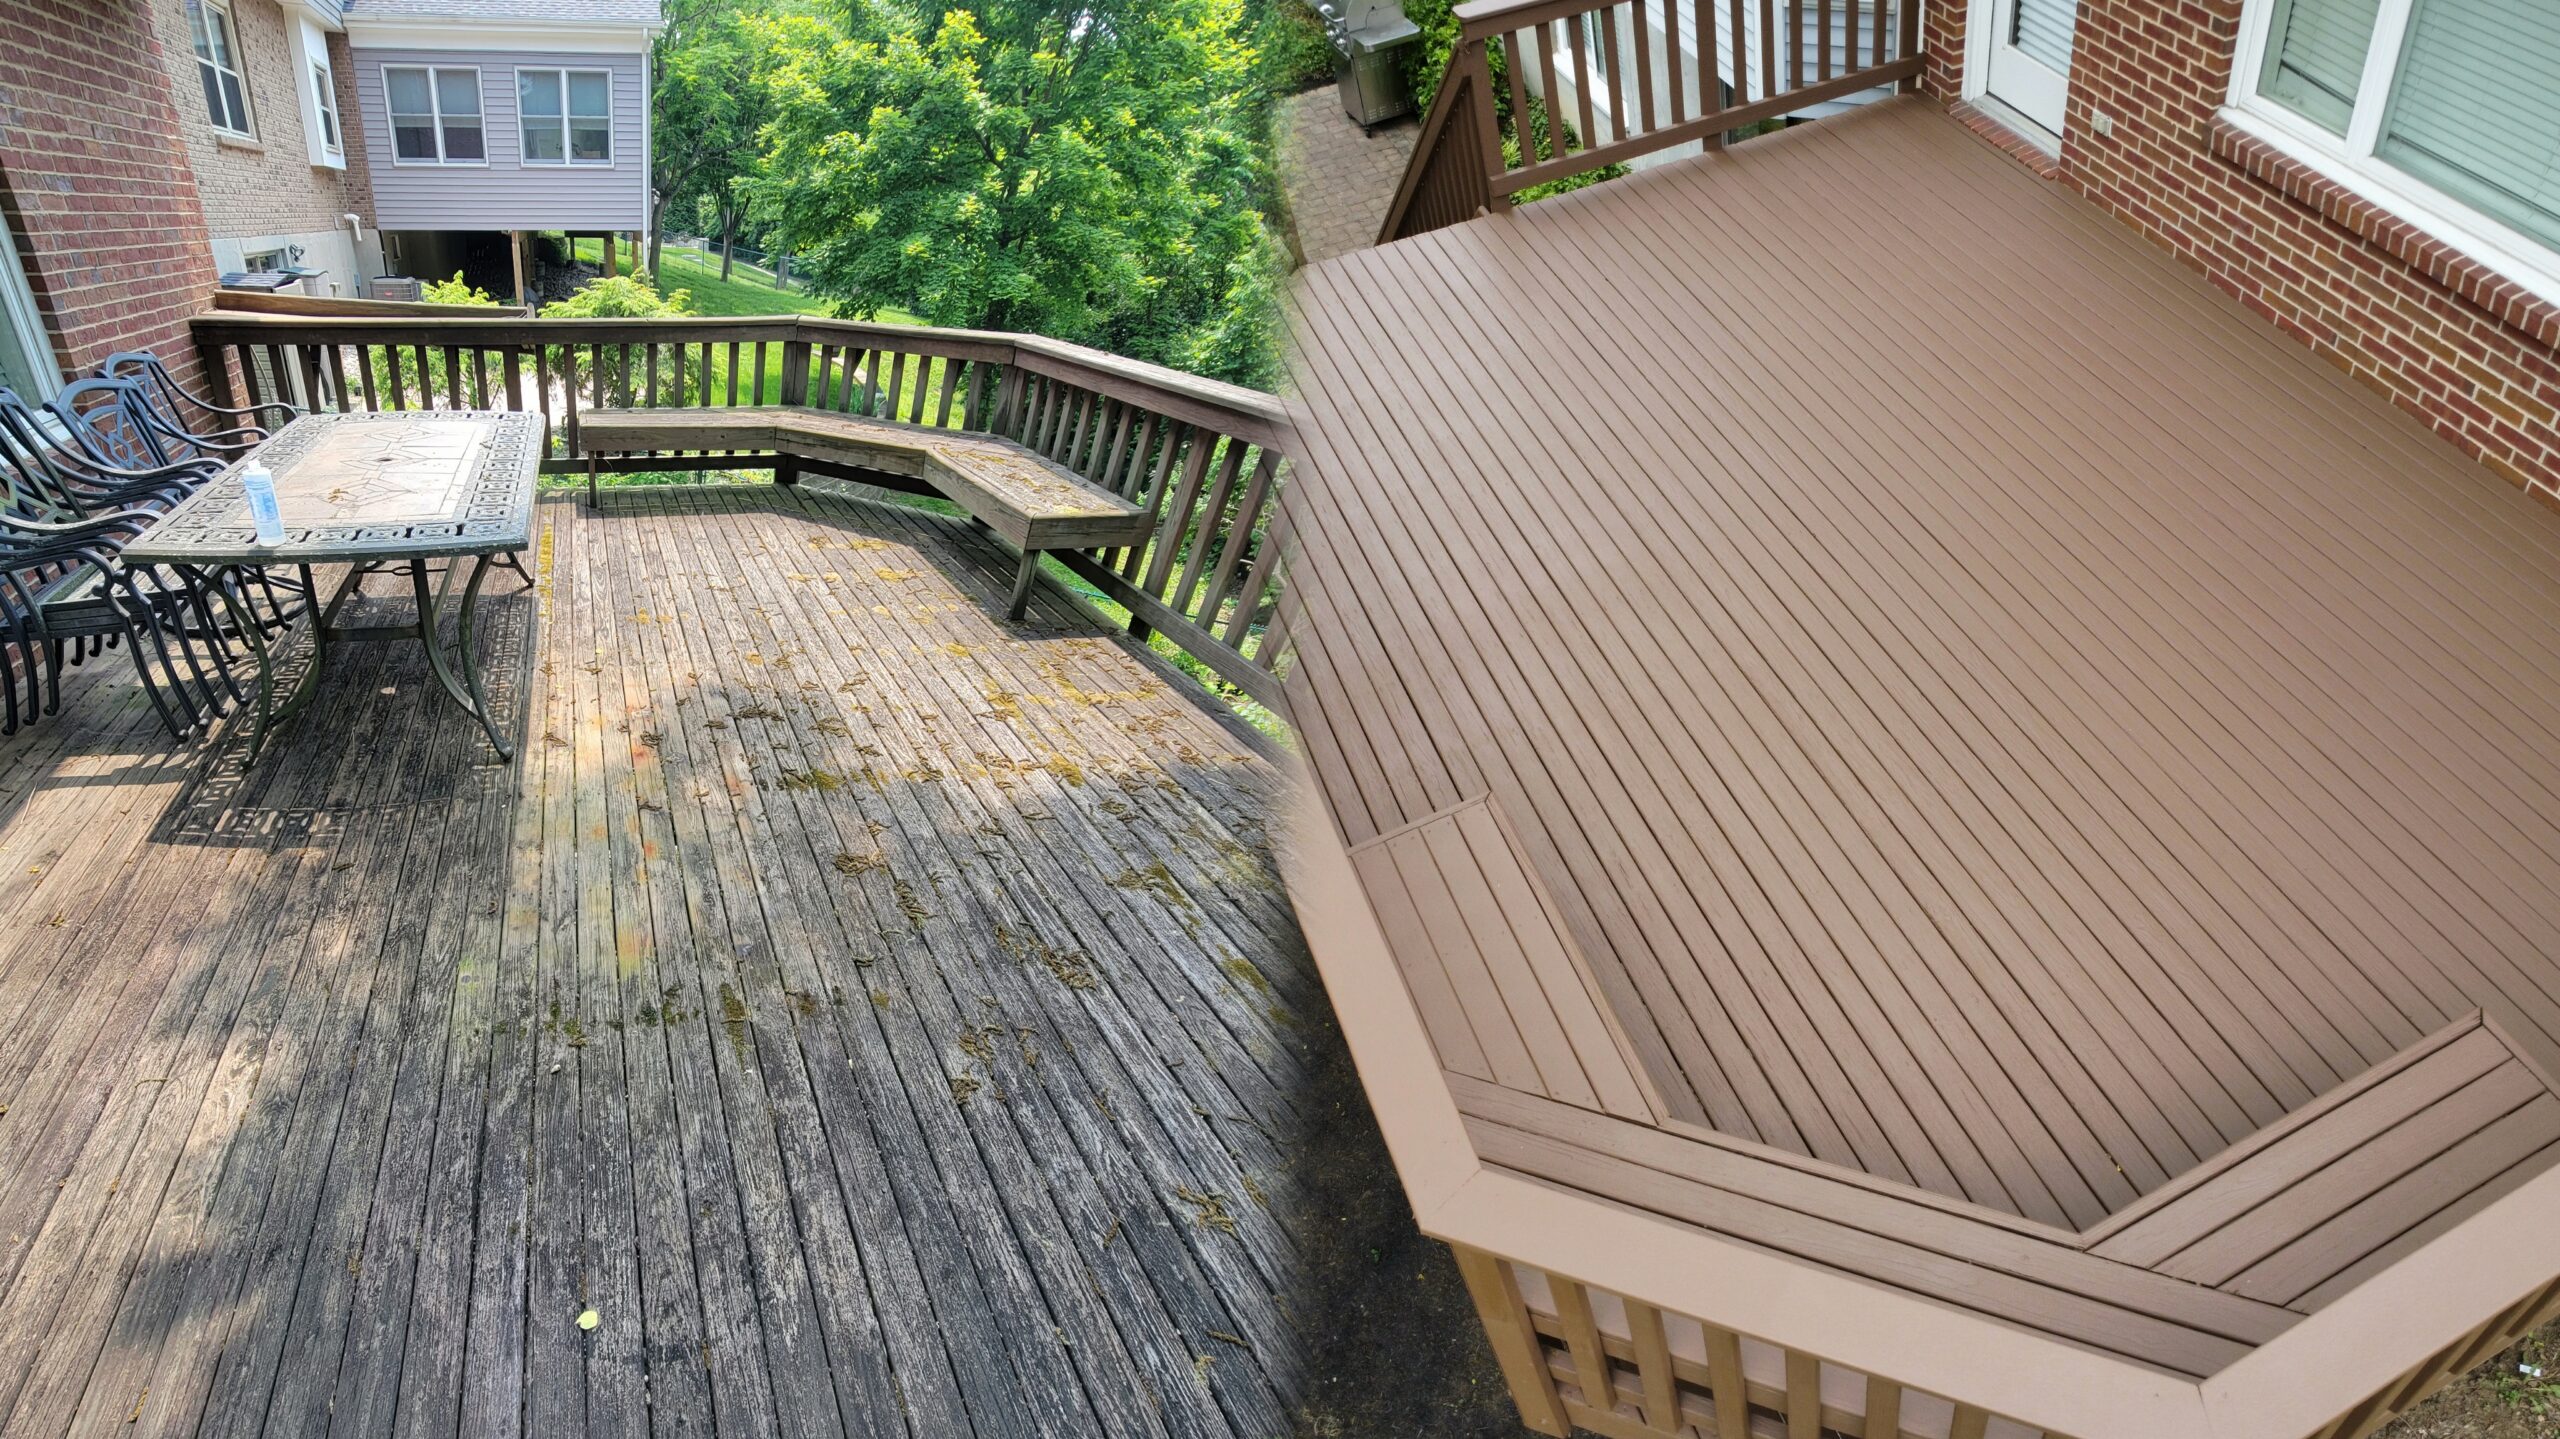 image shows before and after of a dilapidated deck to fully restored and beautifully coated in a high-build thick gorgeous deck coating by deck painters Kong Armor